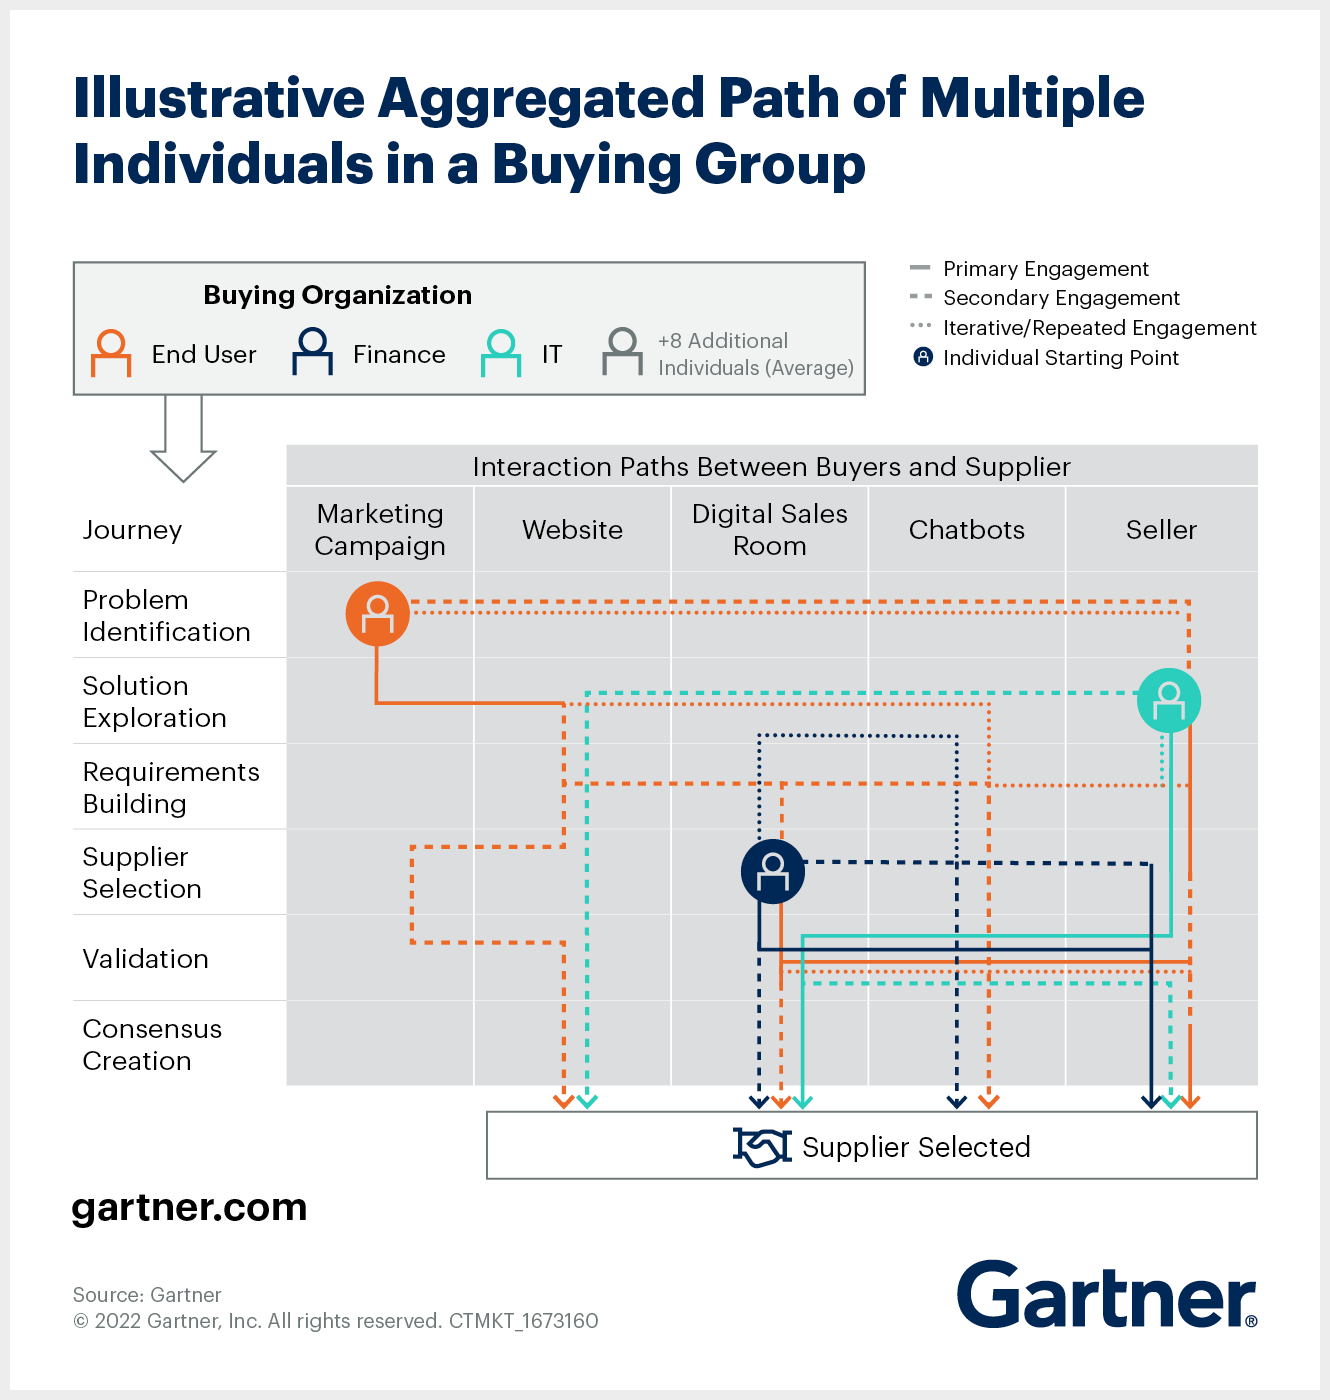 Illustrative Aggregated Path of Multiple Individuals in a Buying Group